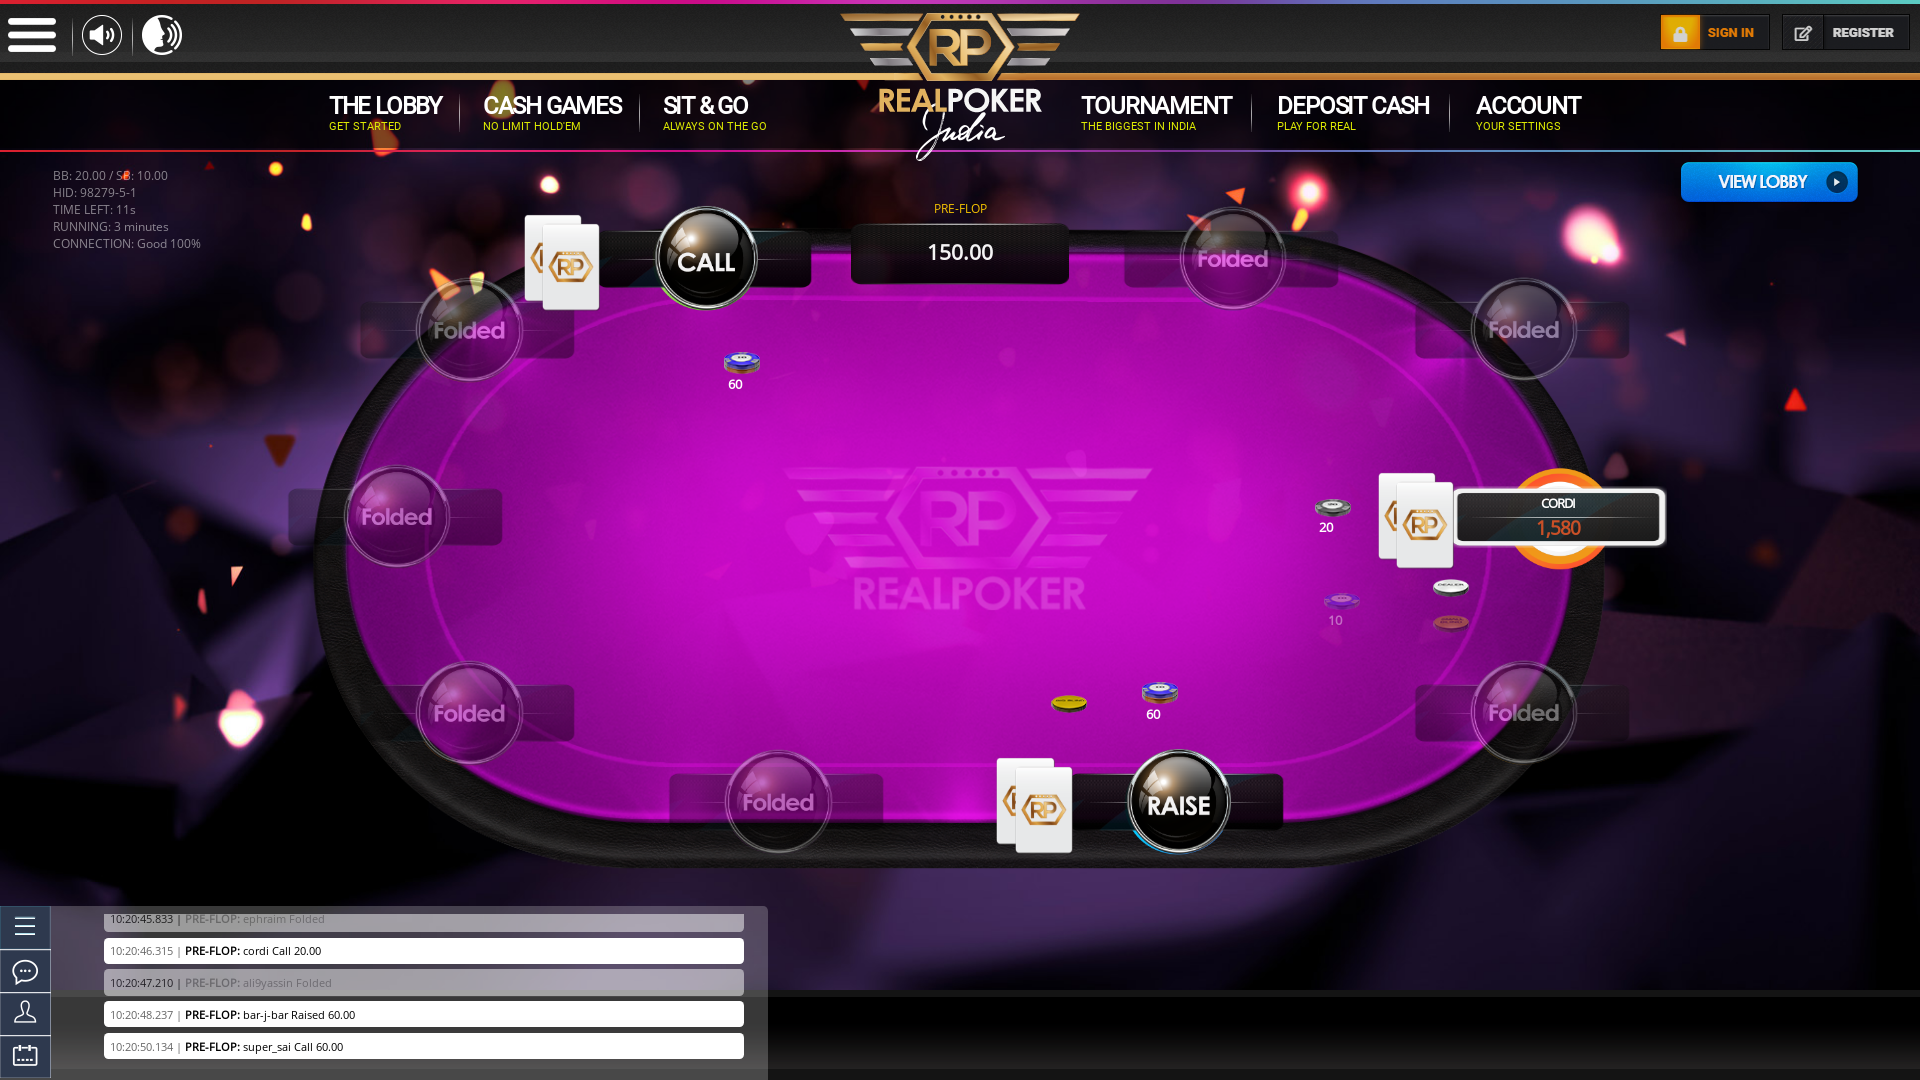 Real poker 10 player table in the 2nd minute